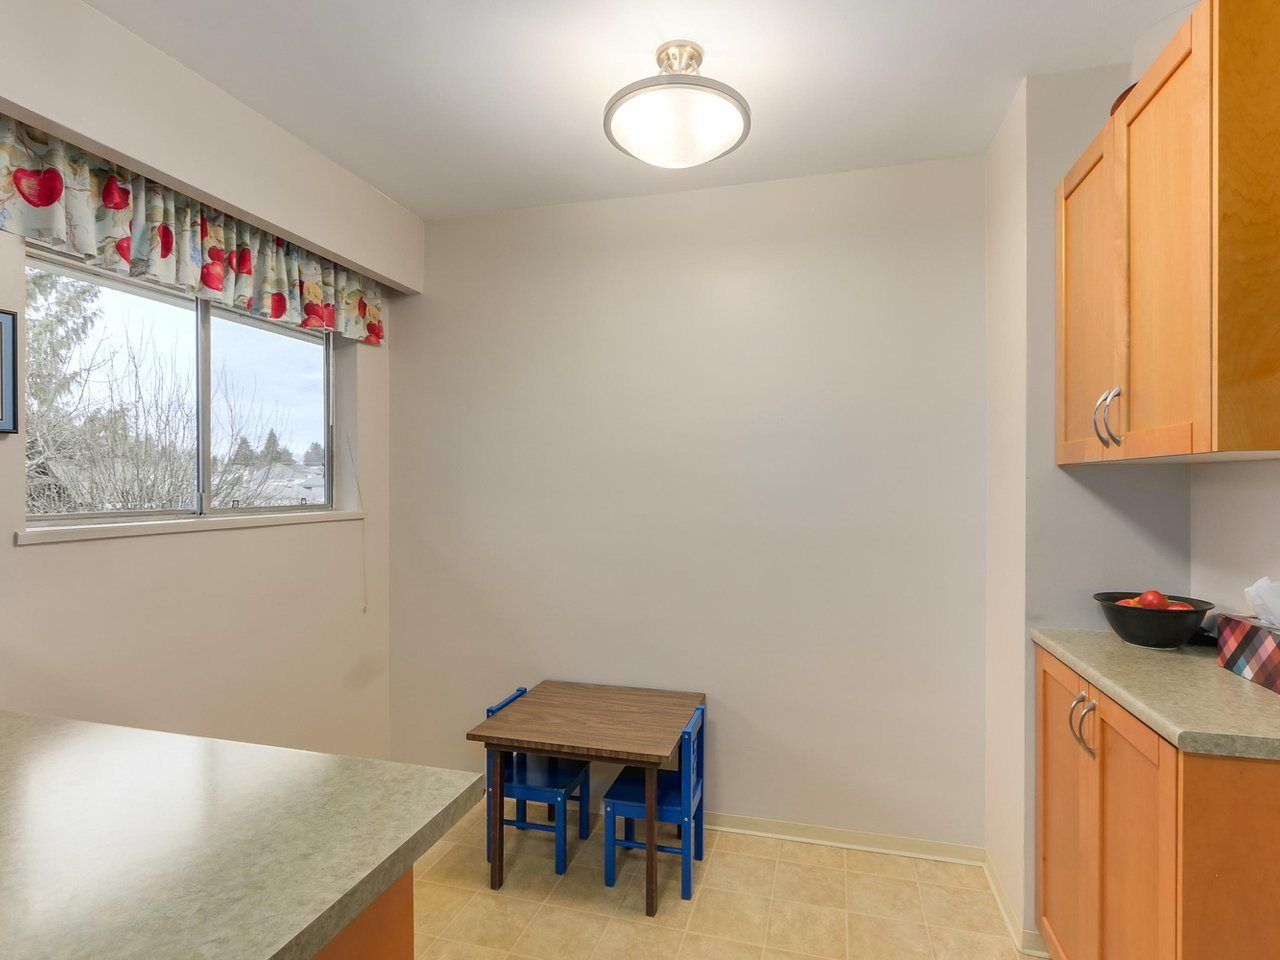 Photo 11: Photos: 1970 ORLAND Drive in Coquitlam: Central Coquitlam House for sale : MLS®# R2330558